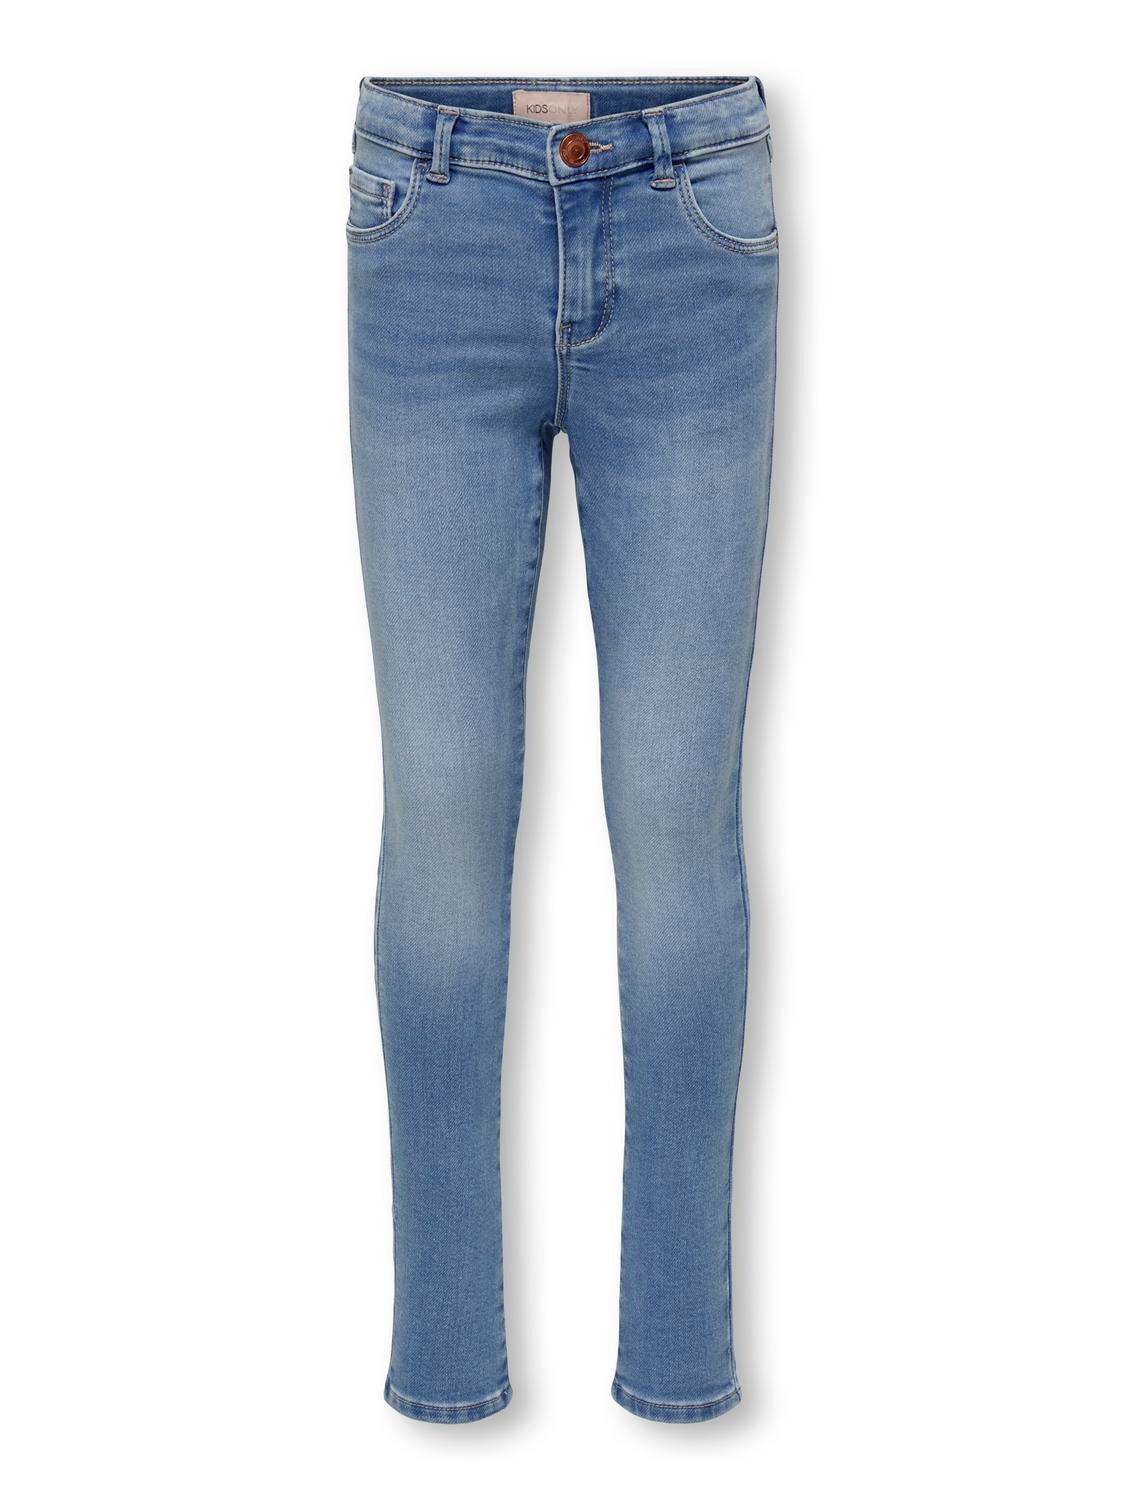 Blue ONLY® | Jeans Light Fit | Skinny